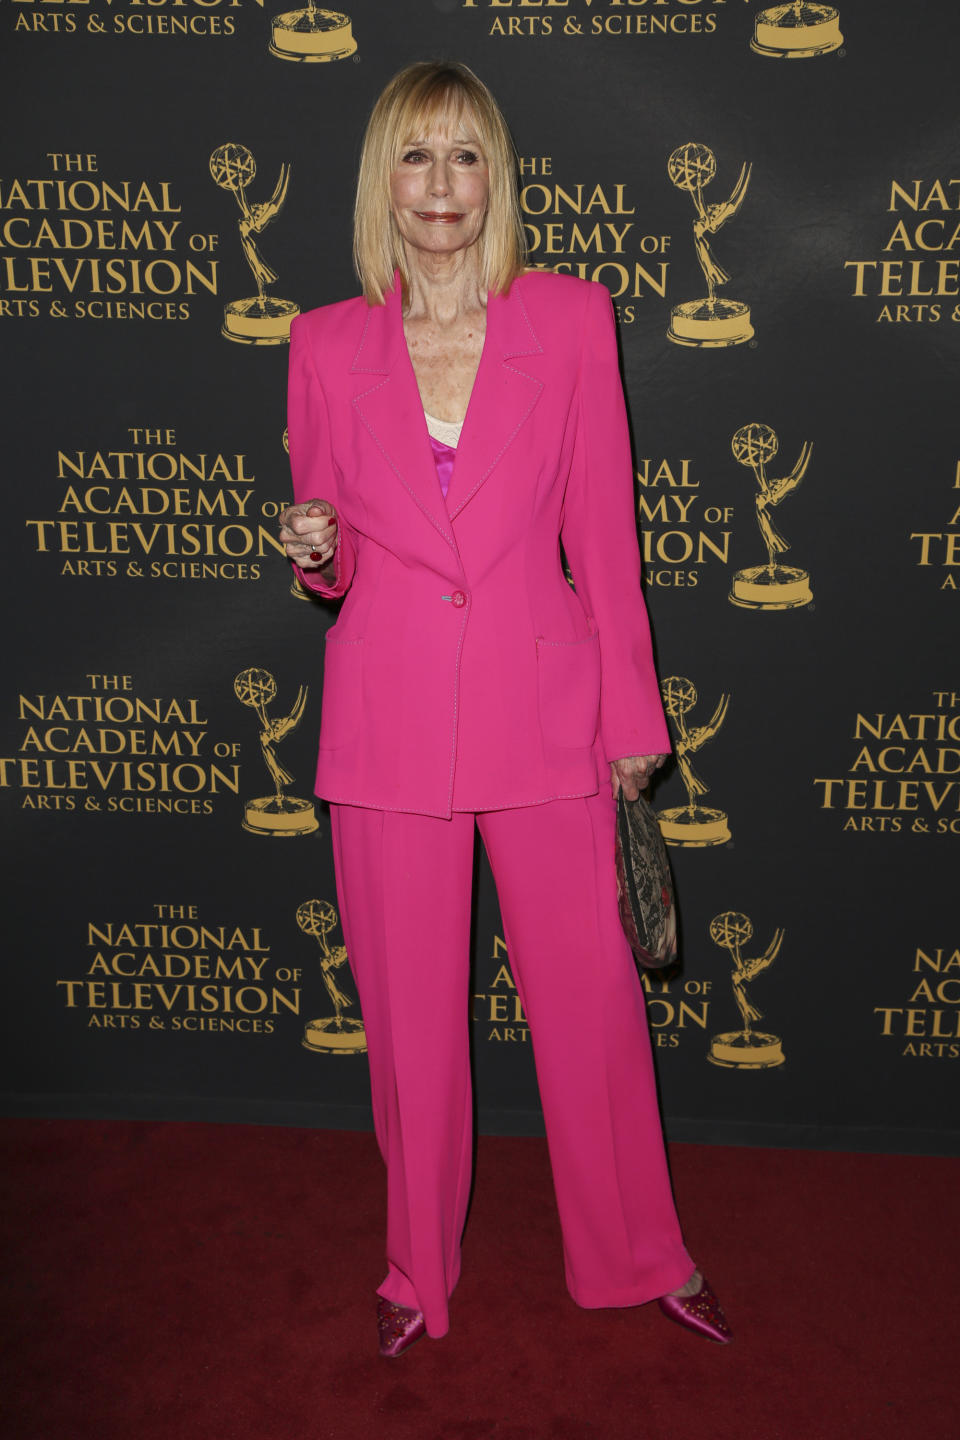 FILE - Sally Kellerman arrives at the 2015 Daytime Creative Arts Emmy Awards at The Universal Hilton on Friday, April 24, 2015, in Universal City, Calif. Kellerman, the Oscar-nominated actor who played “Hot Lips” Houlihan in director Robert Altman's 1970 army comedy “MASH," died Thursday, Feb. 24, 2022, at age 84. Kellerman died of heart failure at her home in the Woodland Hills section of Los Angeles, her manager and publicist Alan Eichler said. (Photo by Rich Fury/Invision/AP, File)